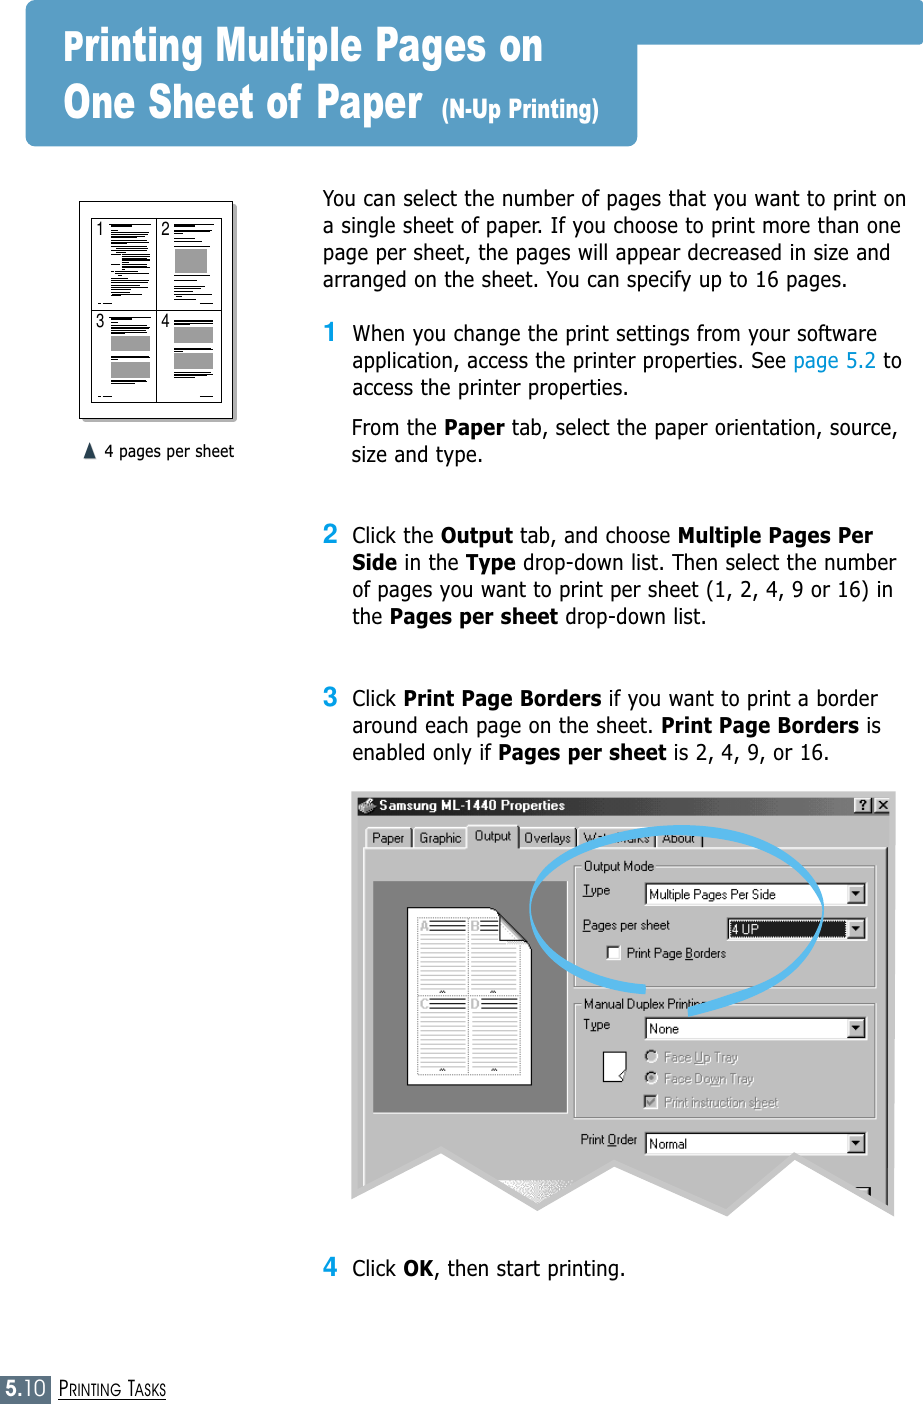 5.10PRINTING TASKS1 23 4You can select the number of pages that you want to print ona single sheet of paper. If you choose to print more than onepage per sheet, the pages will appear decreased in size andarranged on the sheet. You can specify up to 16 pages.1When you change the print settings from your softwareapplication, access the printer properties. See page 5.2 toaccess the printer properties.From the Paper tab, select the paper orientation, source,size and type.2Click the Output tab, and choose Multiple Pages PerSide in the Type drop-down list. Then select the numberof pages you want to print per sheet (1, 2, 4, 9 or 16) inthe Pages per sheet drop-down list.3Click Print Page Borders if you want to print a borderaround each page on the sheet. Print Page Borders isenabled only if Pages per sheet is 2, 4, 9, or 16.➐☎➐☎4 pages per sheetPrinting Multiple Pages on One Sheet of Paper (N-Up Printing)4Click OK, then start printing. 